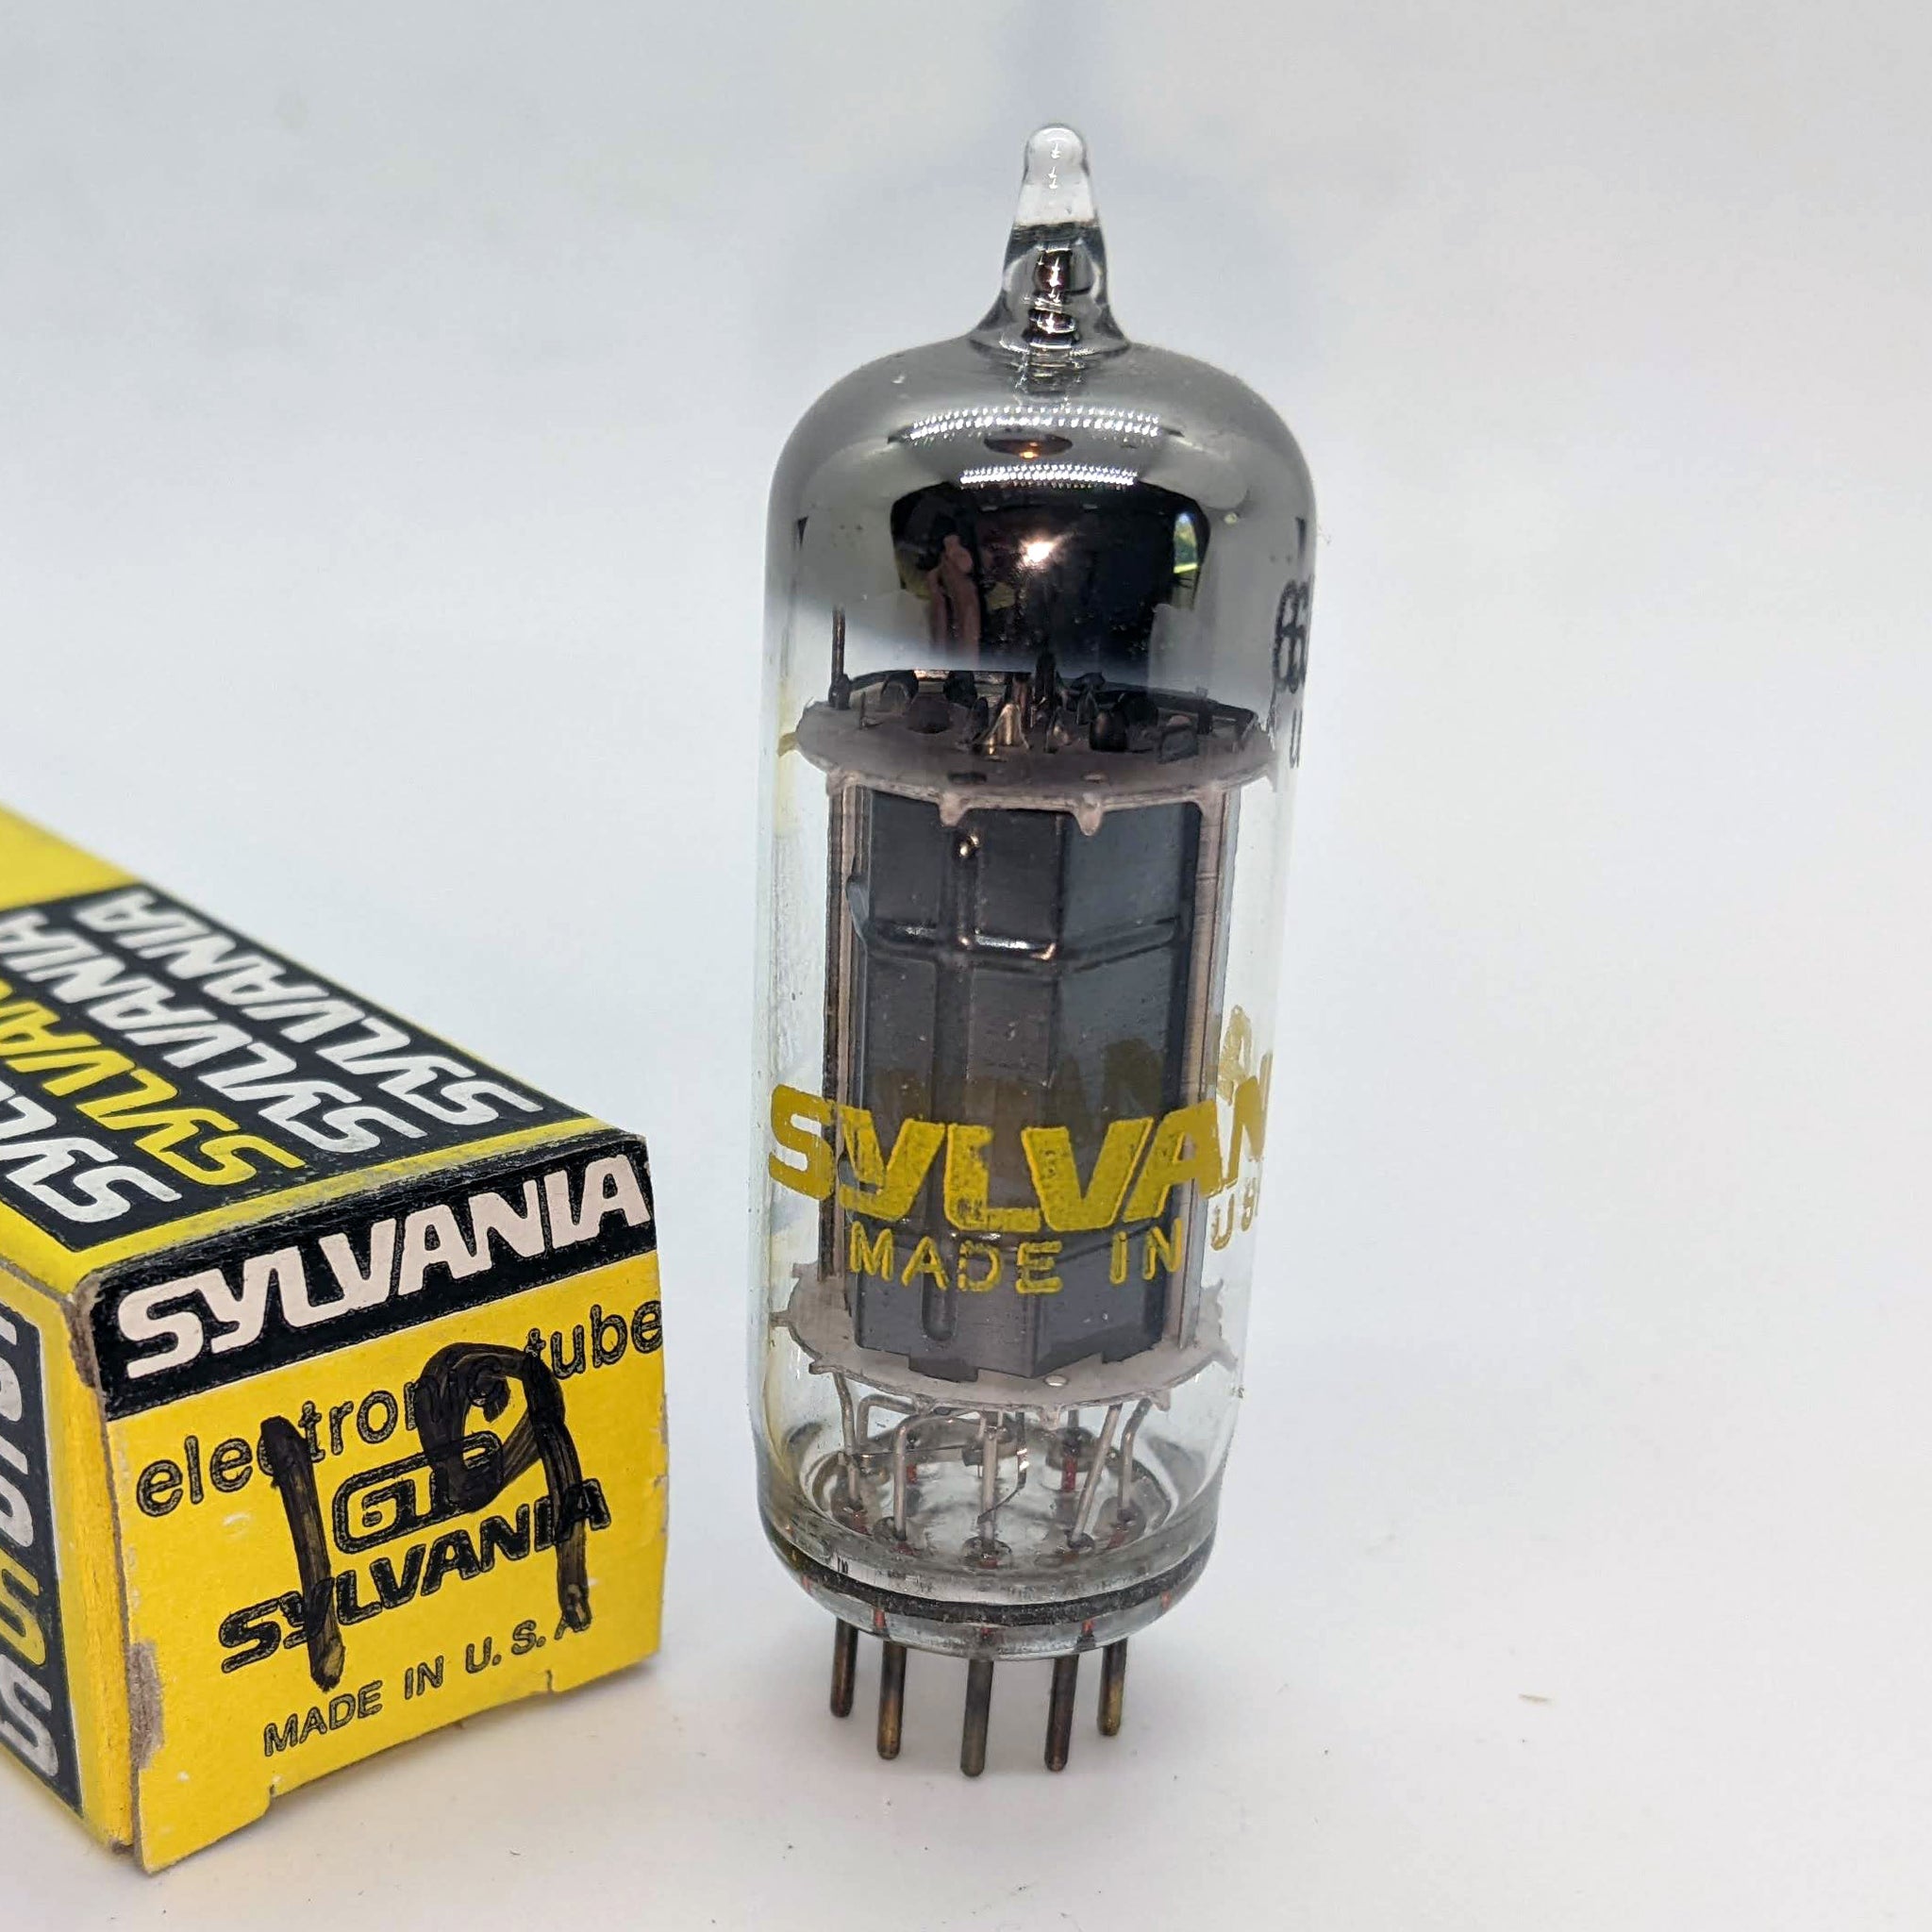 New Sylvania 6JH8 Tube, Tested Strong On Hickok Tester